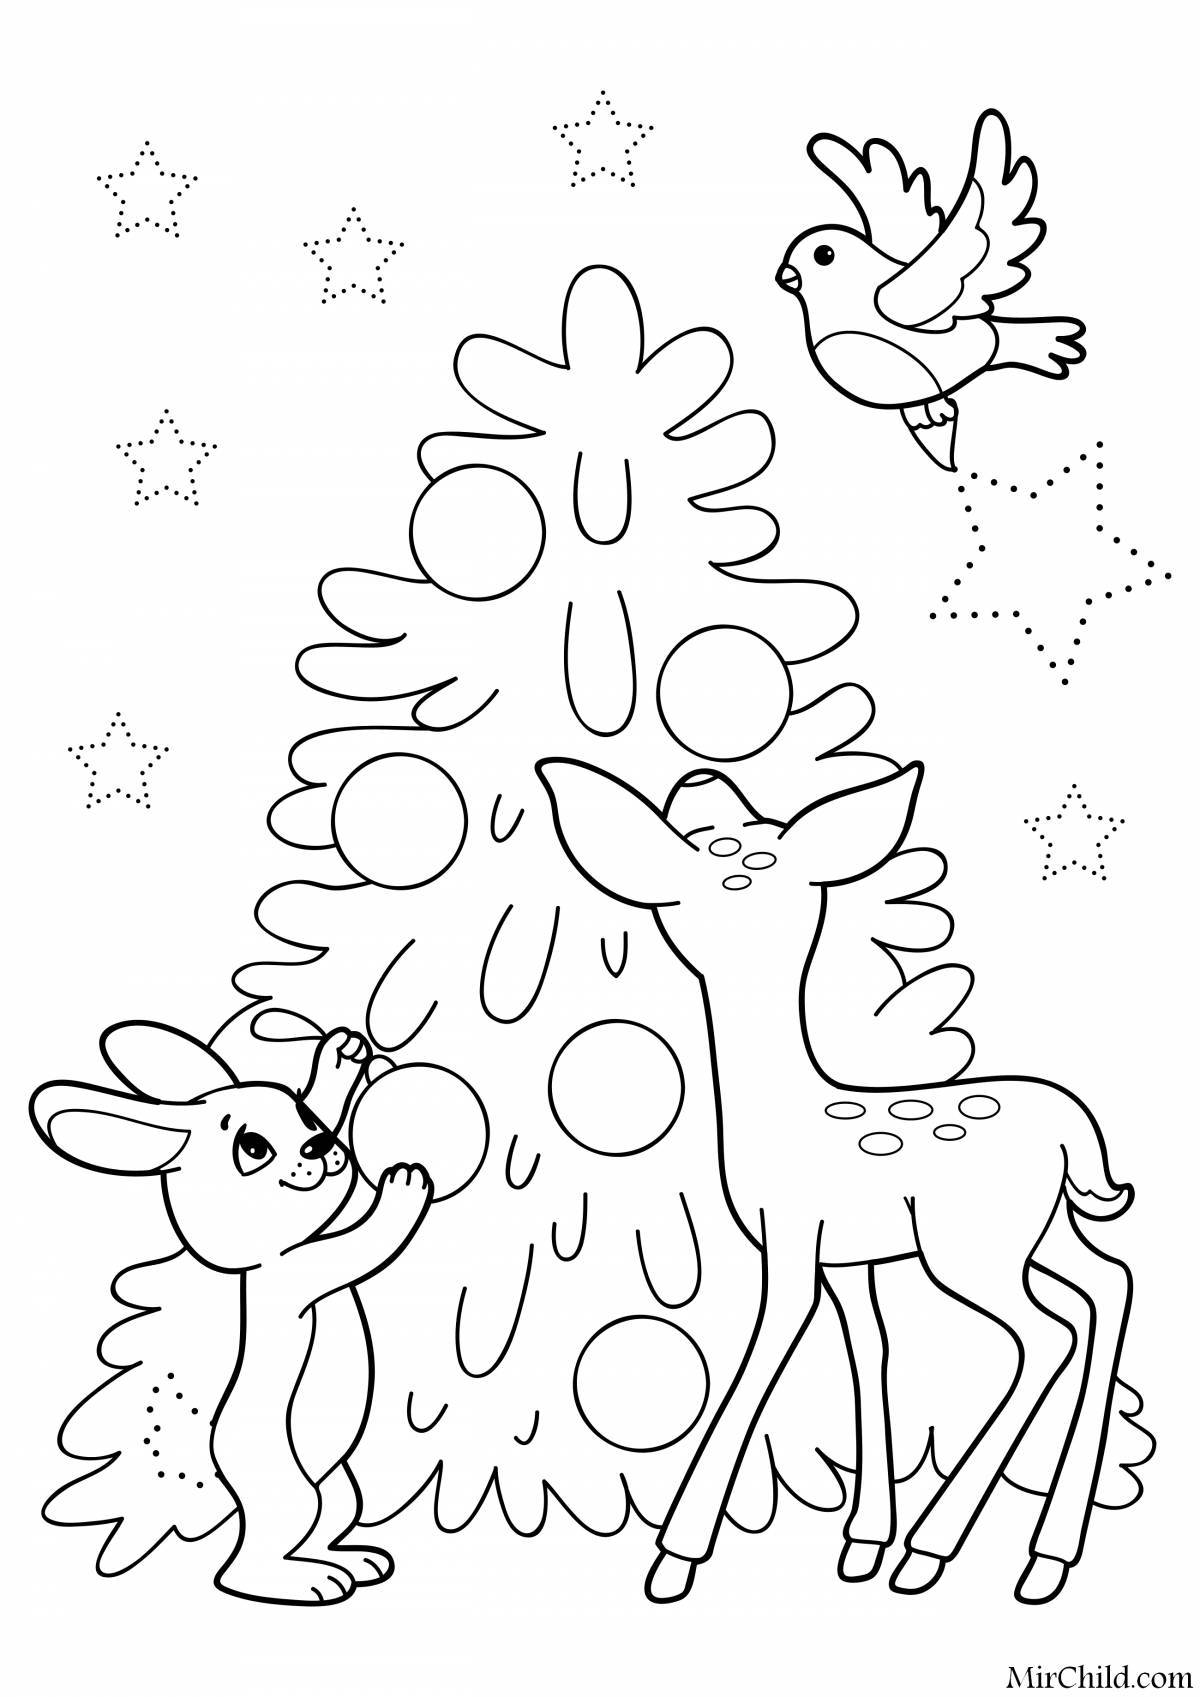 Merry Christmas coloring book for children